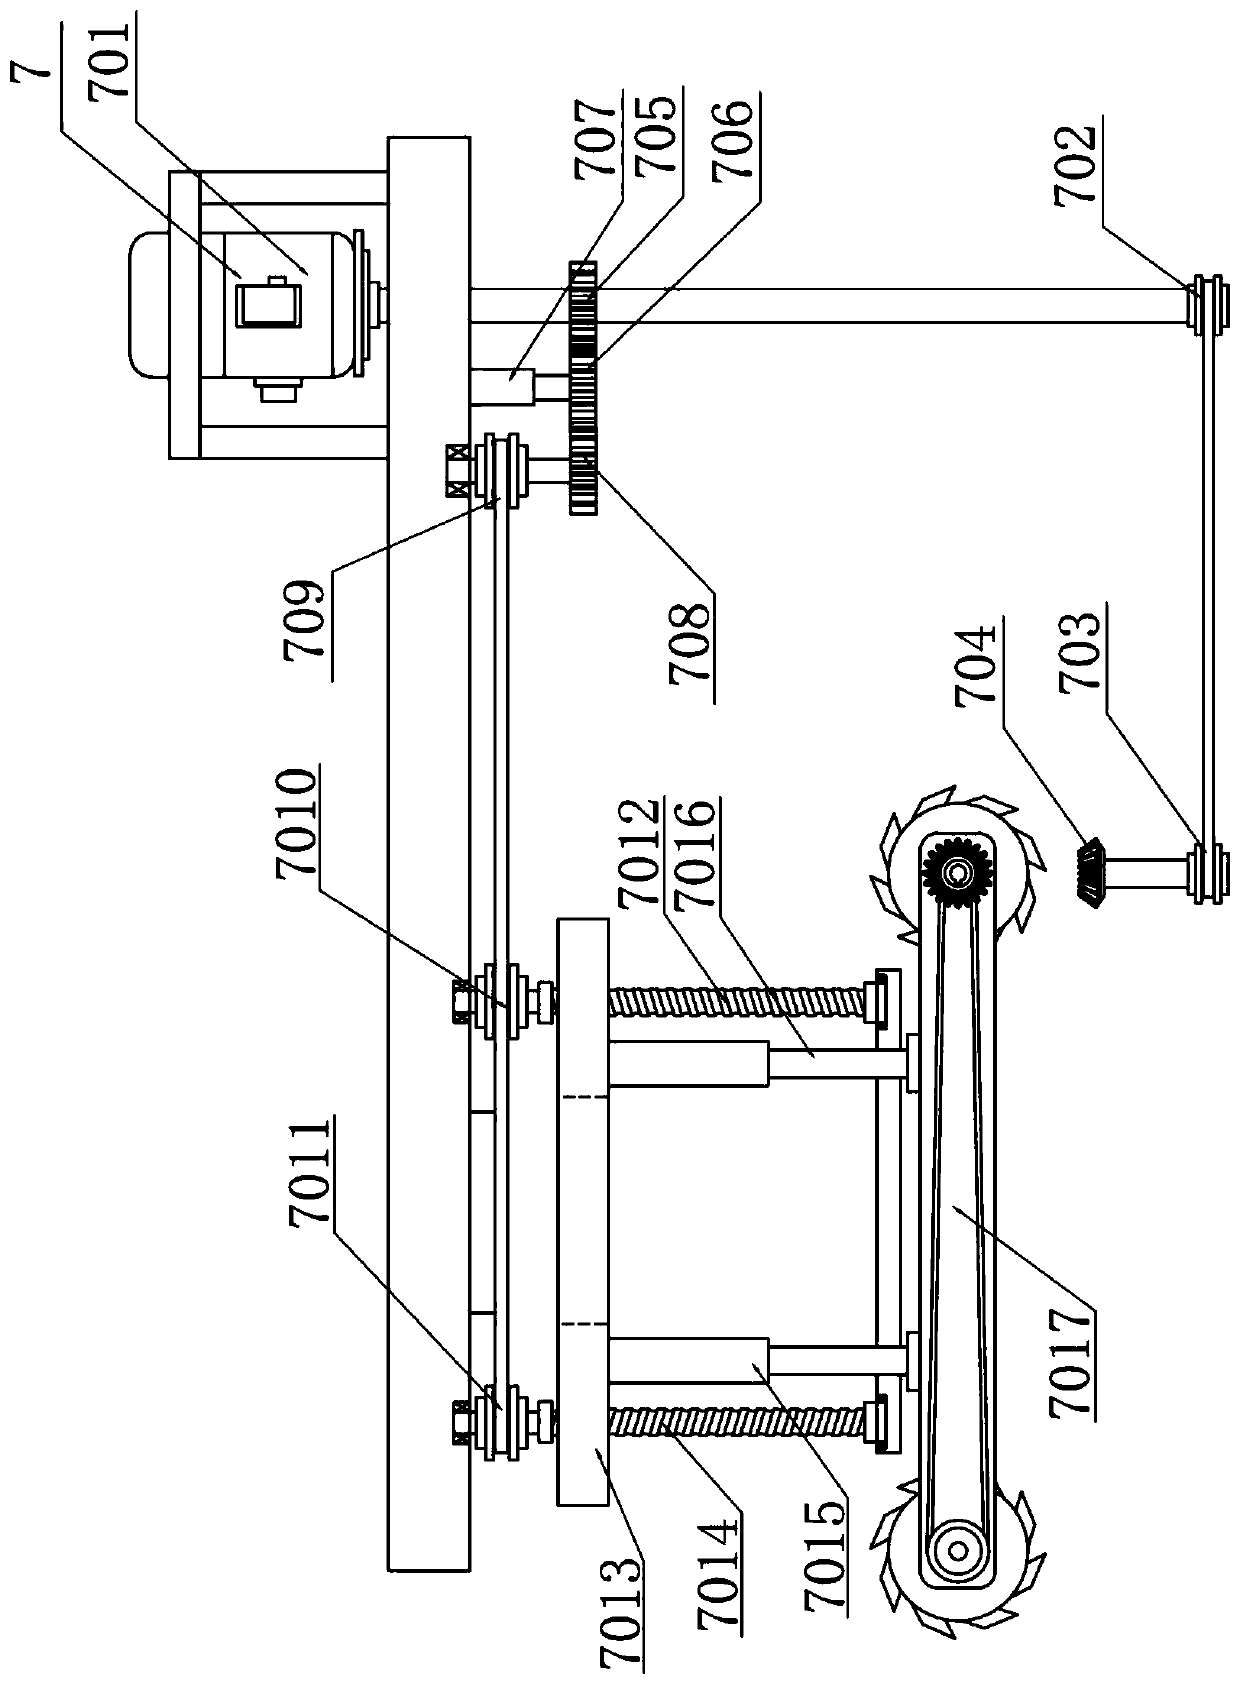 Injection molding processing device